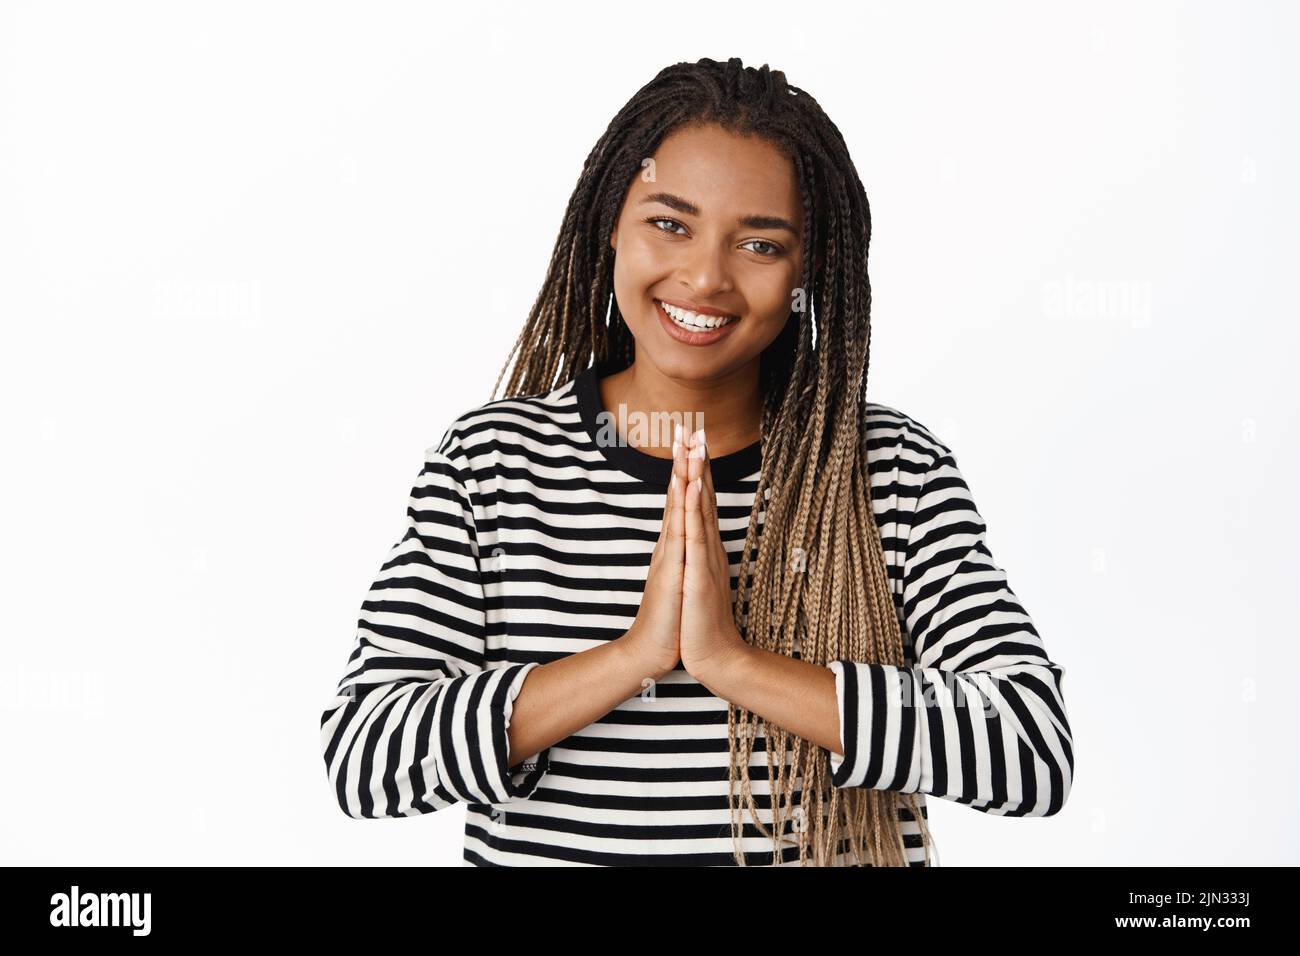 Mindfulness and meditation concept. Smiling black young woman showing namaste gesture, looking happy and relaxed, white background Stock Photo